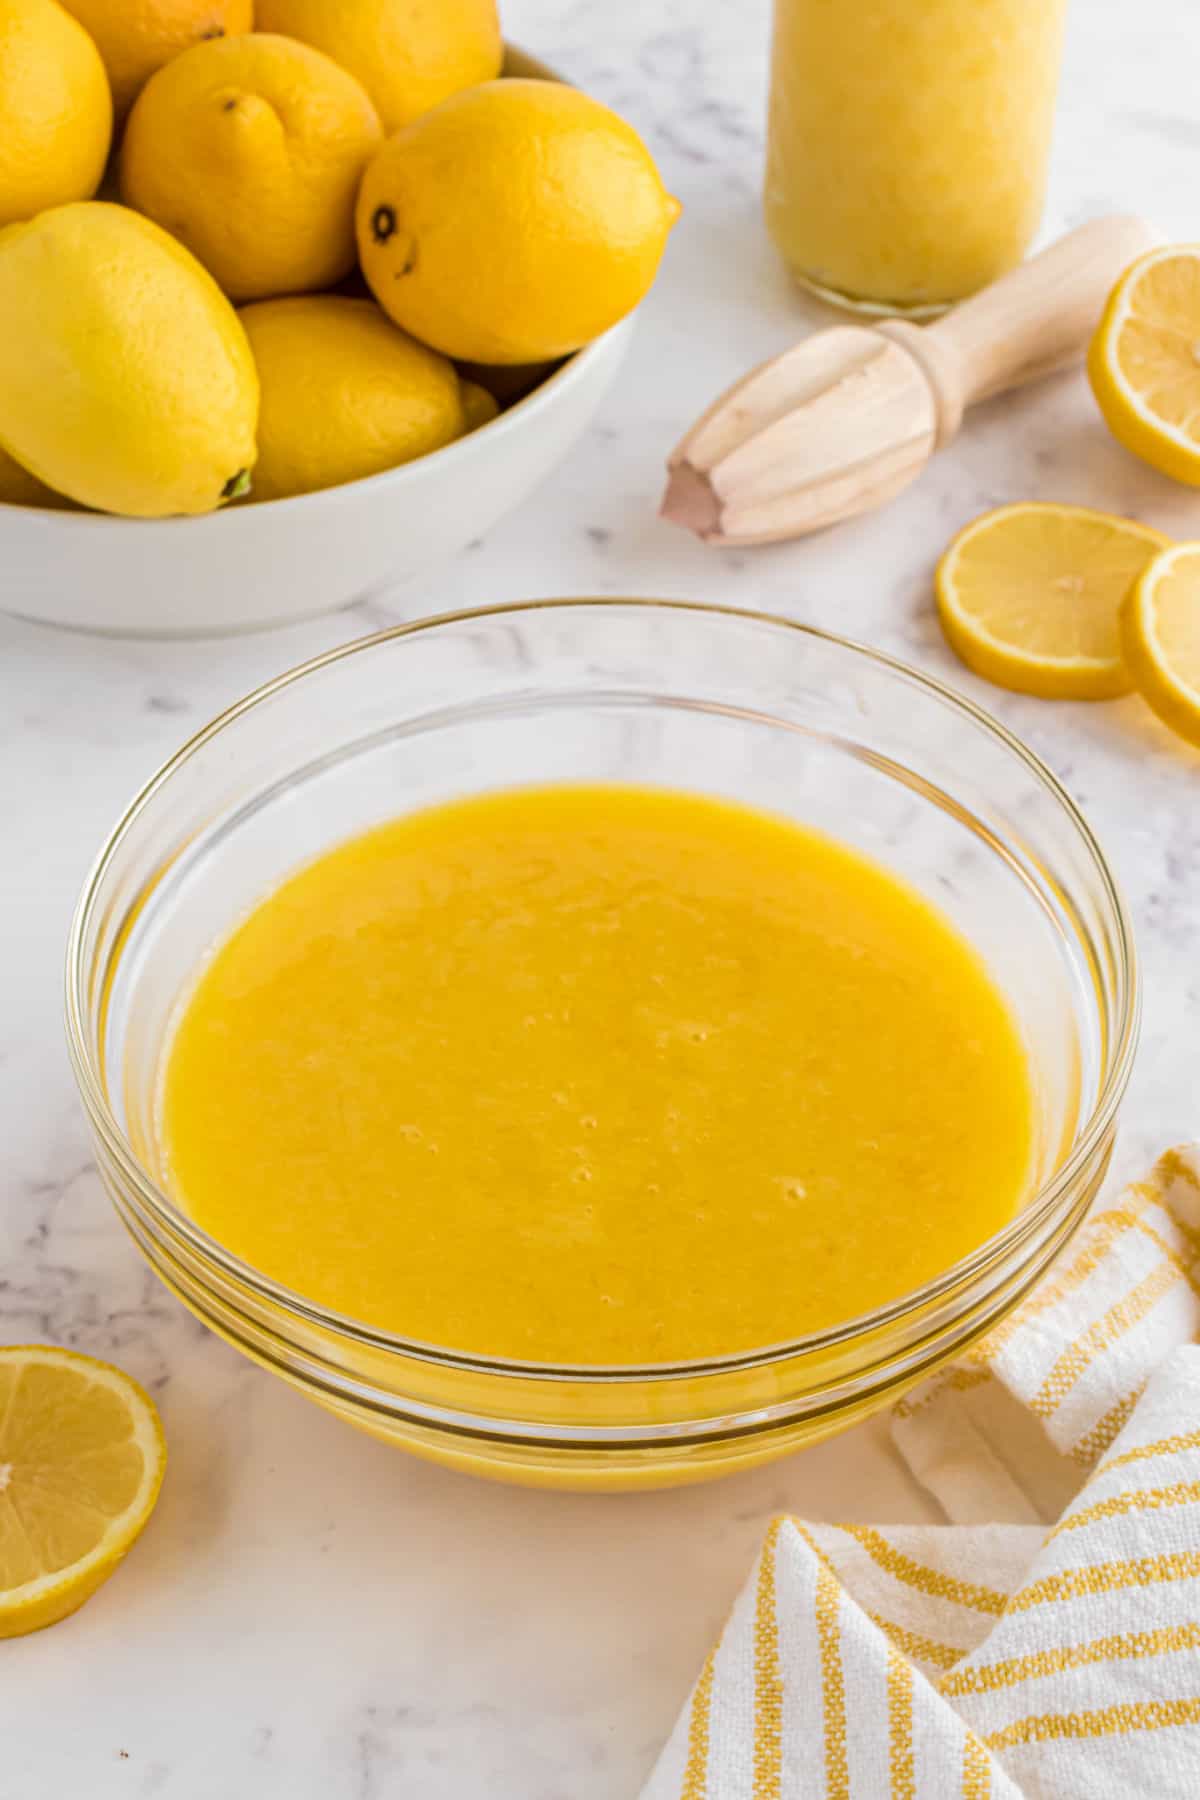 Lemon curd in a clear glass bowl.